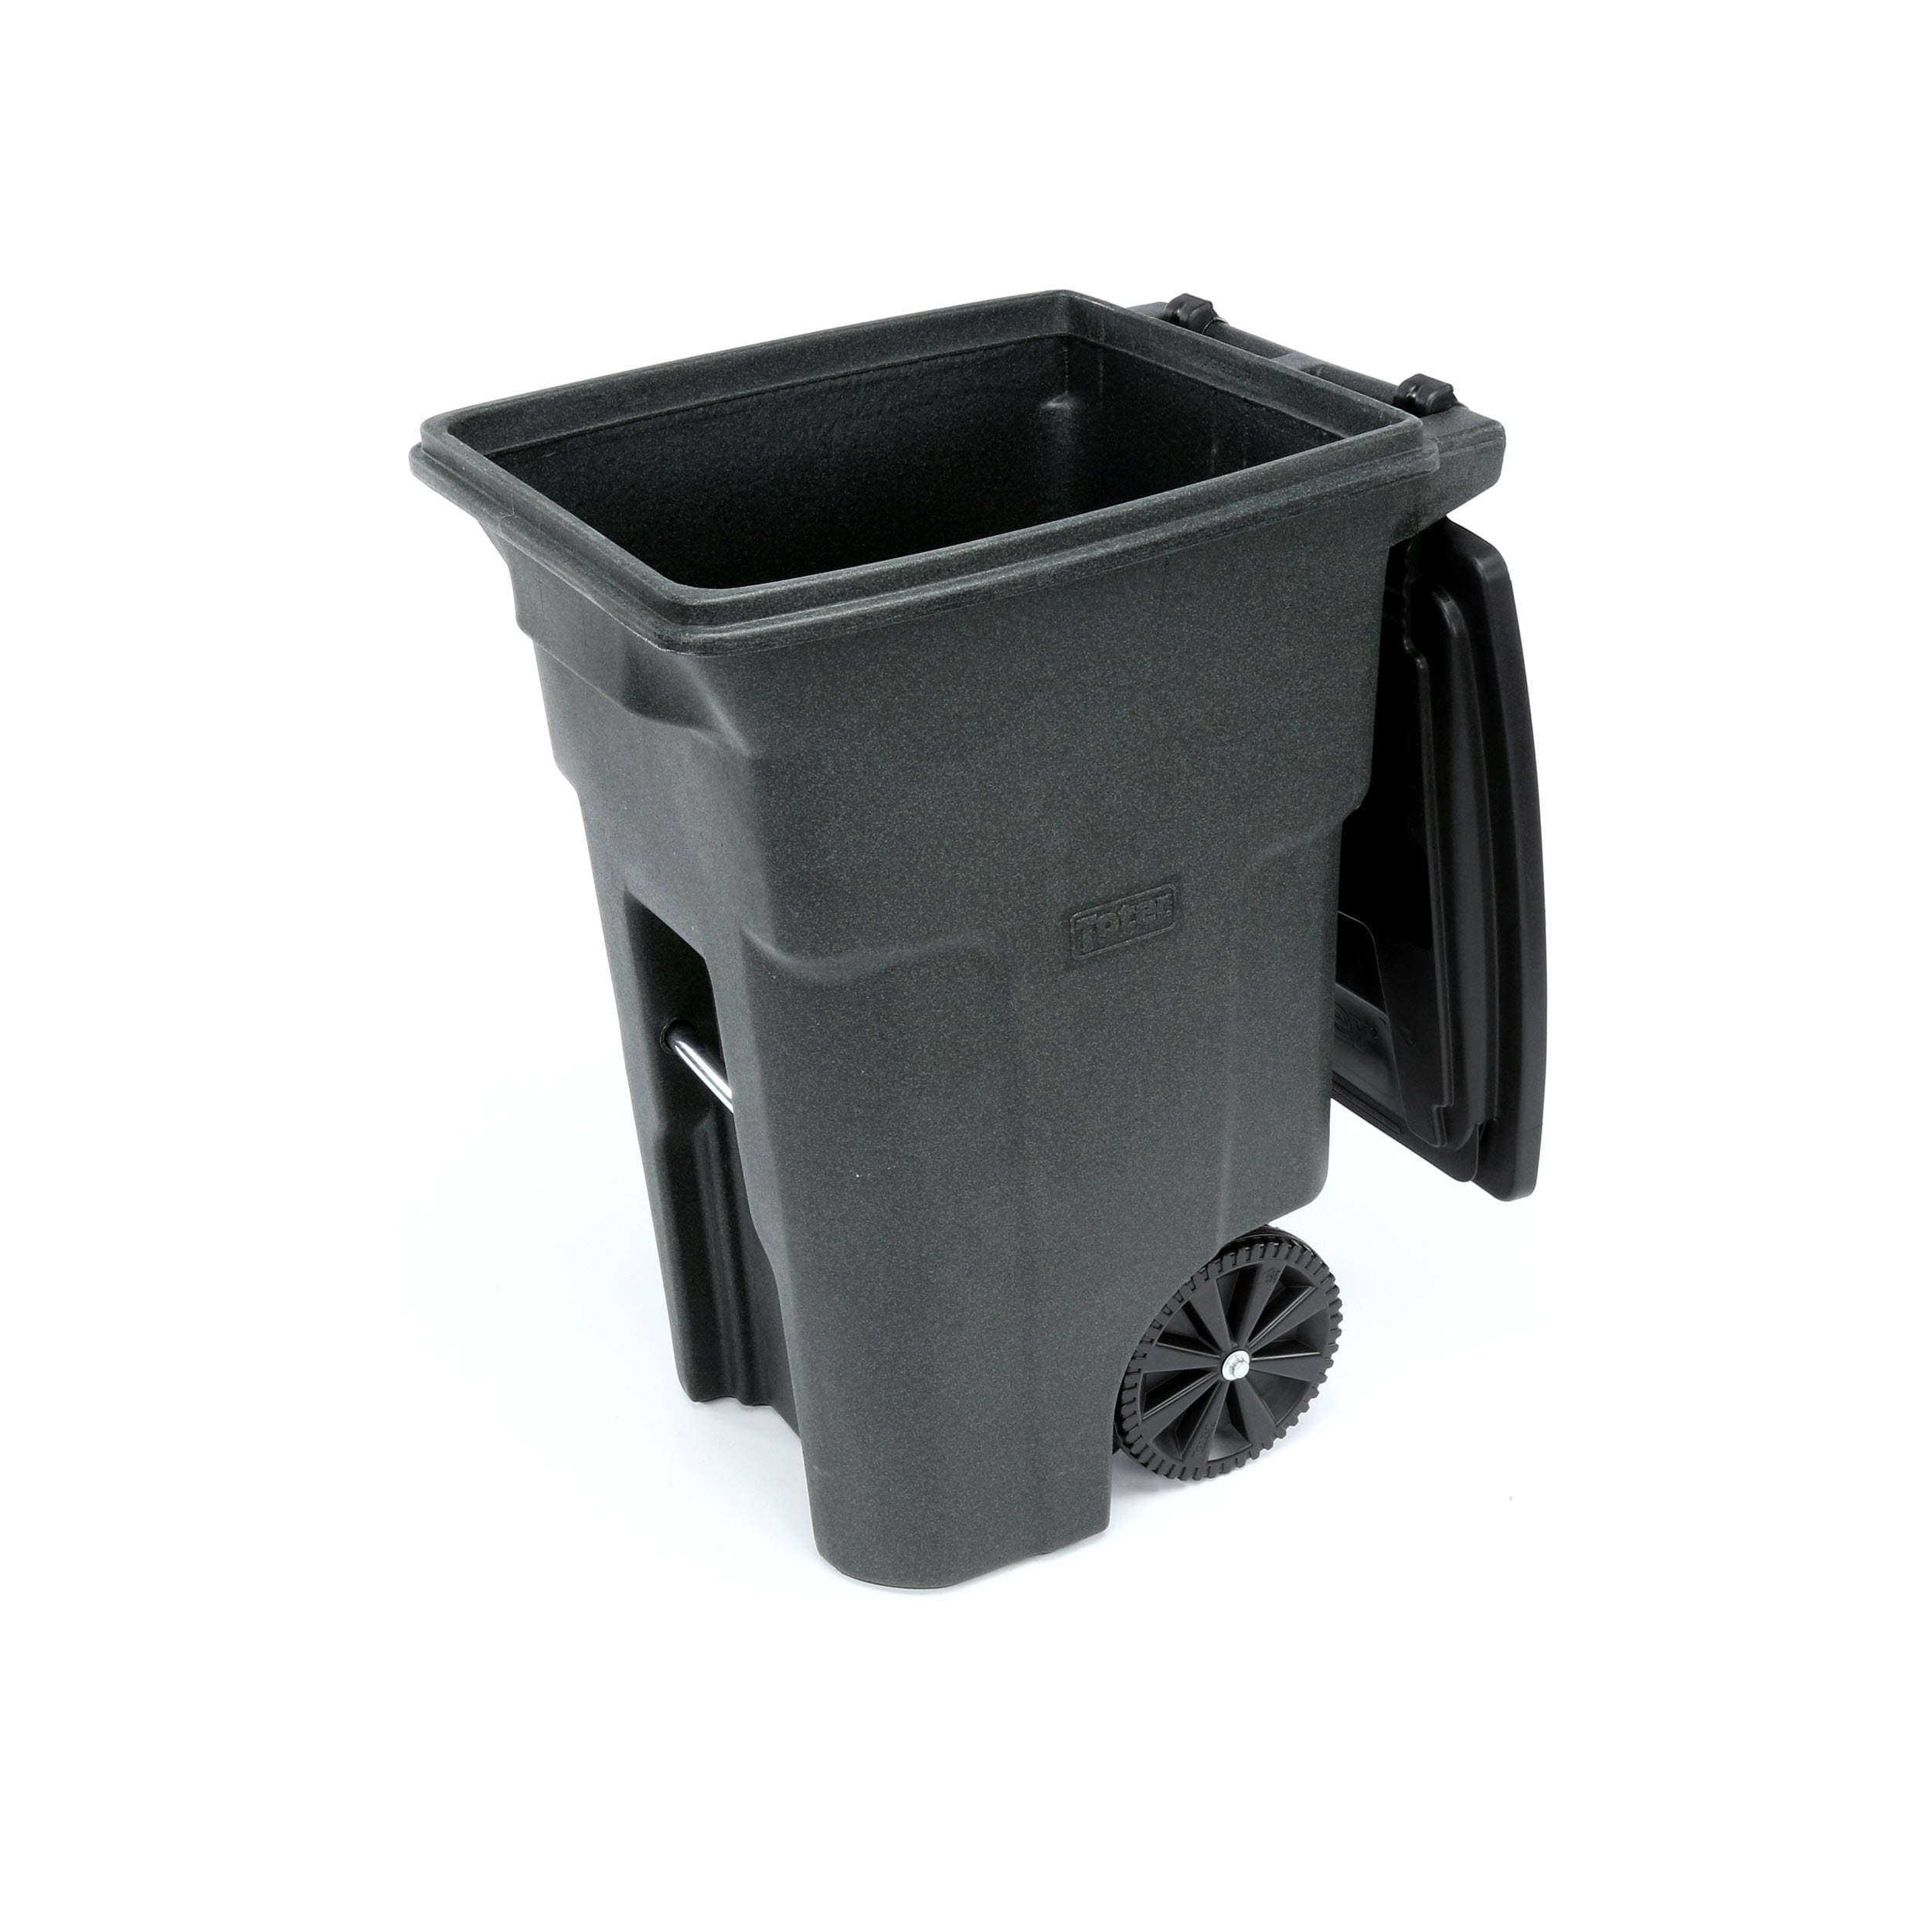 Outdoor Trash Can 660L Outdoor Trash Can with Universal Wheels  Large-capacity Trash Can with Lid Thickened Plastic Sanitation Trailer  Trash Can, Green